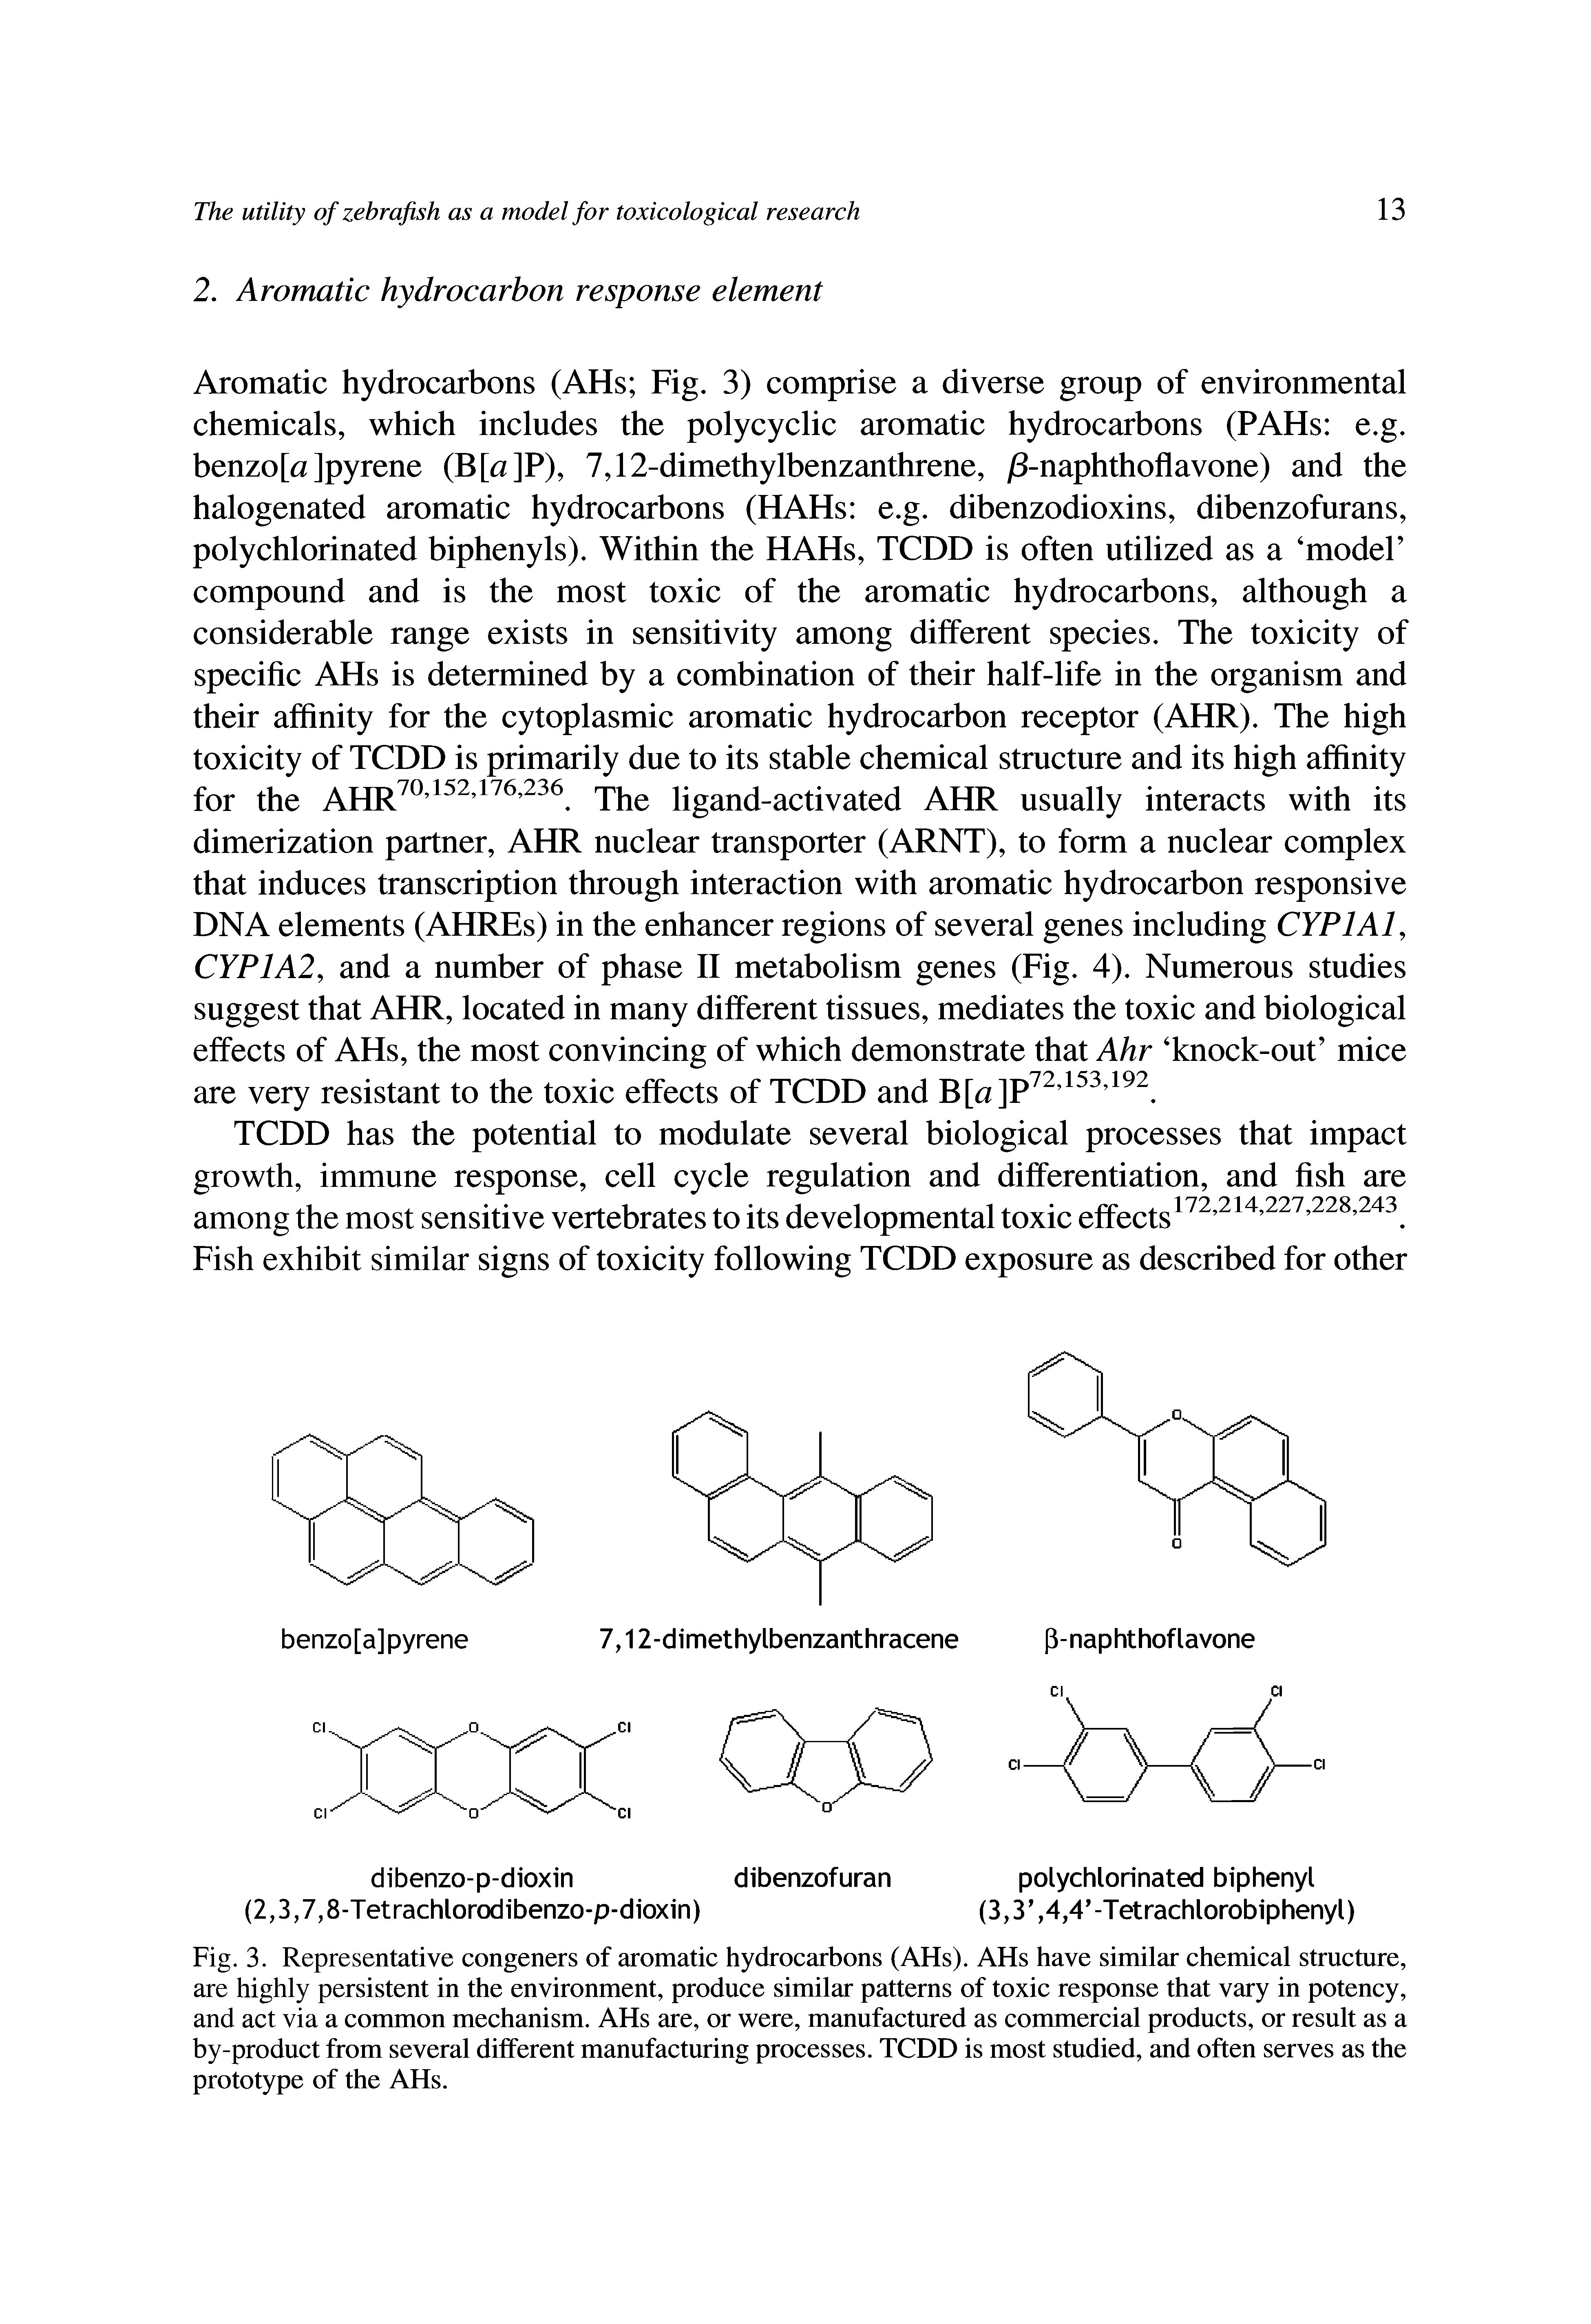 Fig. 3. Representative congeners of aromatic hydrocarbons (AHs). AHs have similar chemical structure, are highly persistent in the environment, produce similar patterns of toxic response that vary in potency, and act via a common mechanism. AHs are, or were, manufactured as commercial products, or result as a by-product from several different manufacturing processes. TCDD is most studied, and often serves as the prototype of the AHs.